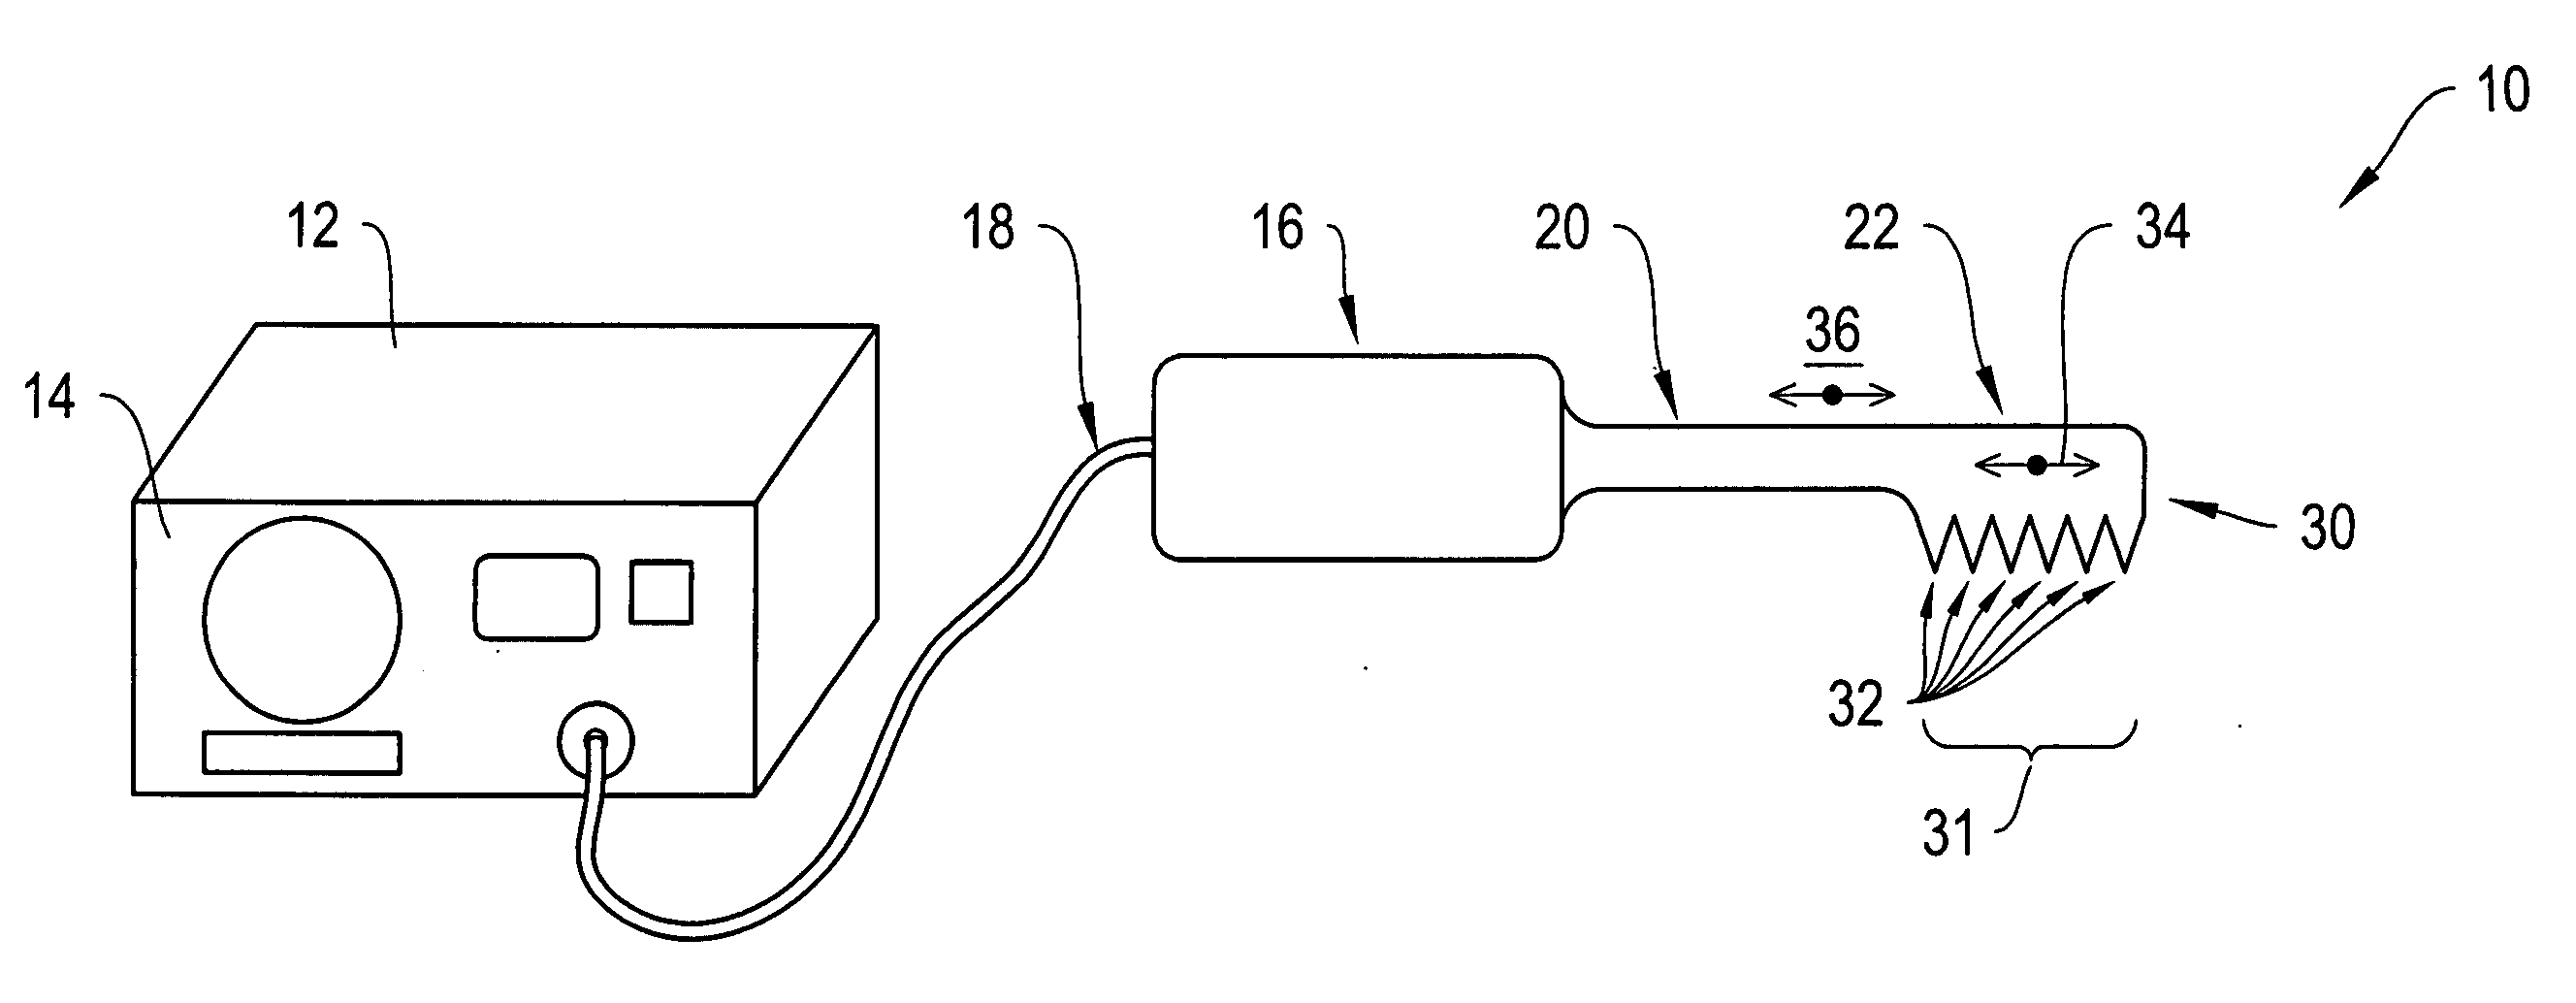 Device and method for ultrasound wound debridement